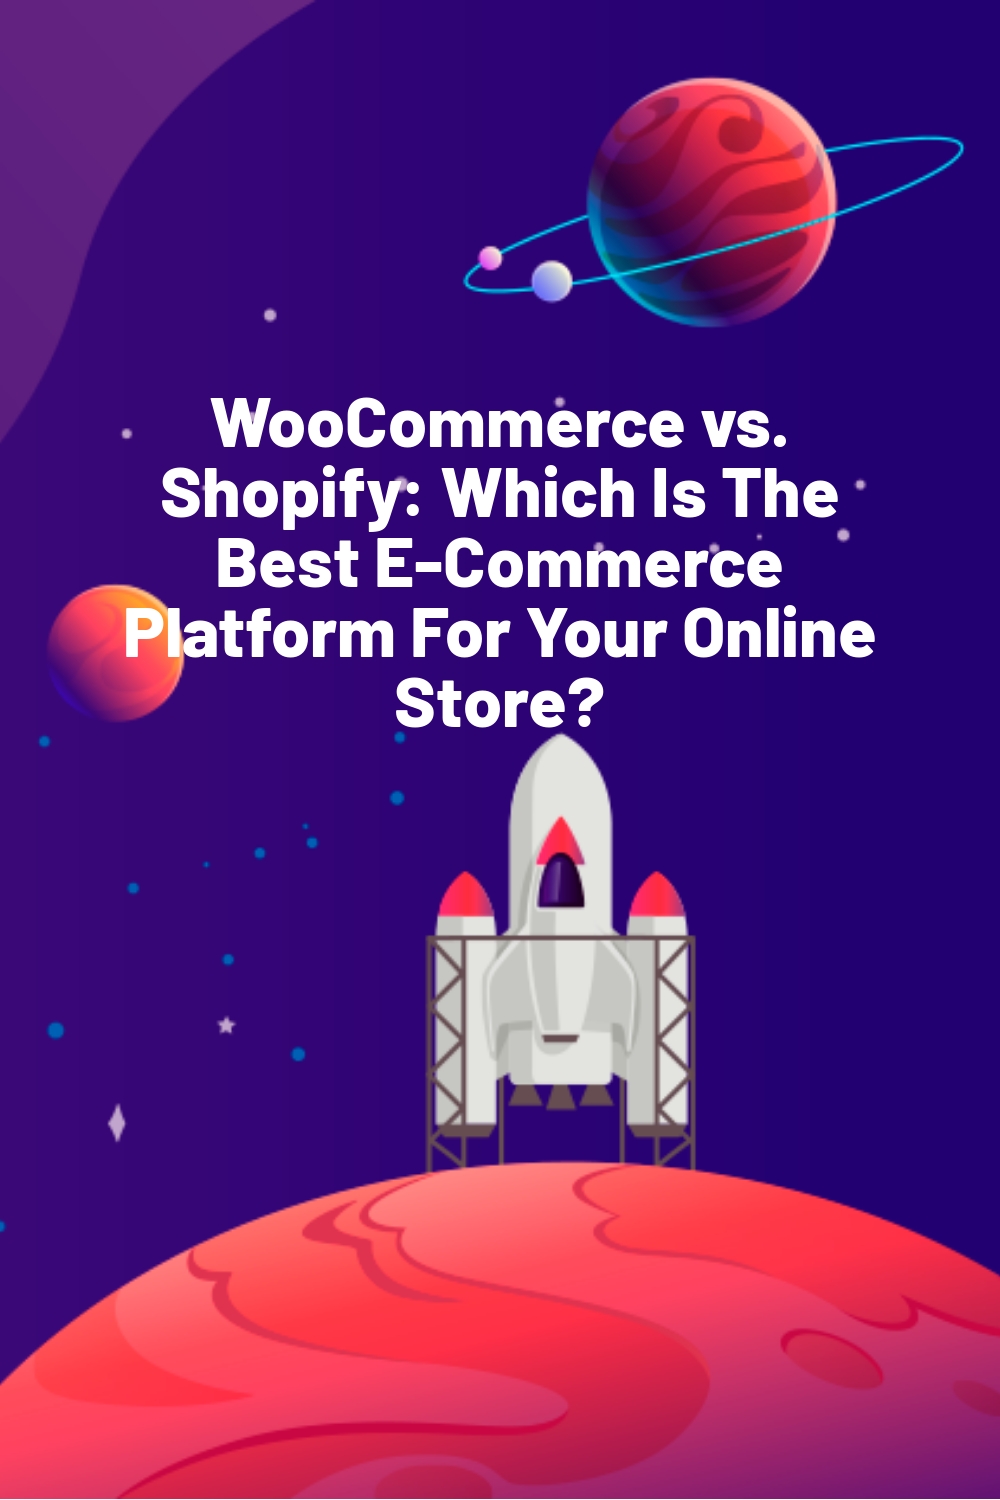 WooCommerce vs. Shopify: Which Is The Best E-Commerce Platform For Your Online Store?